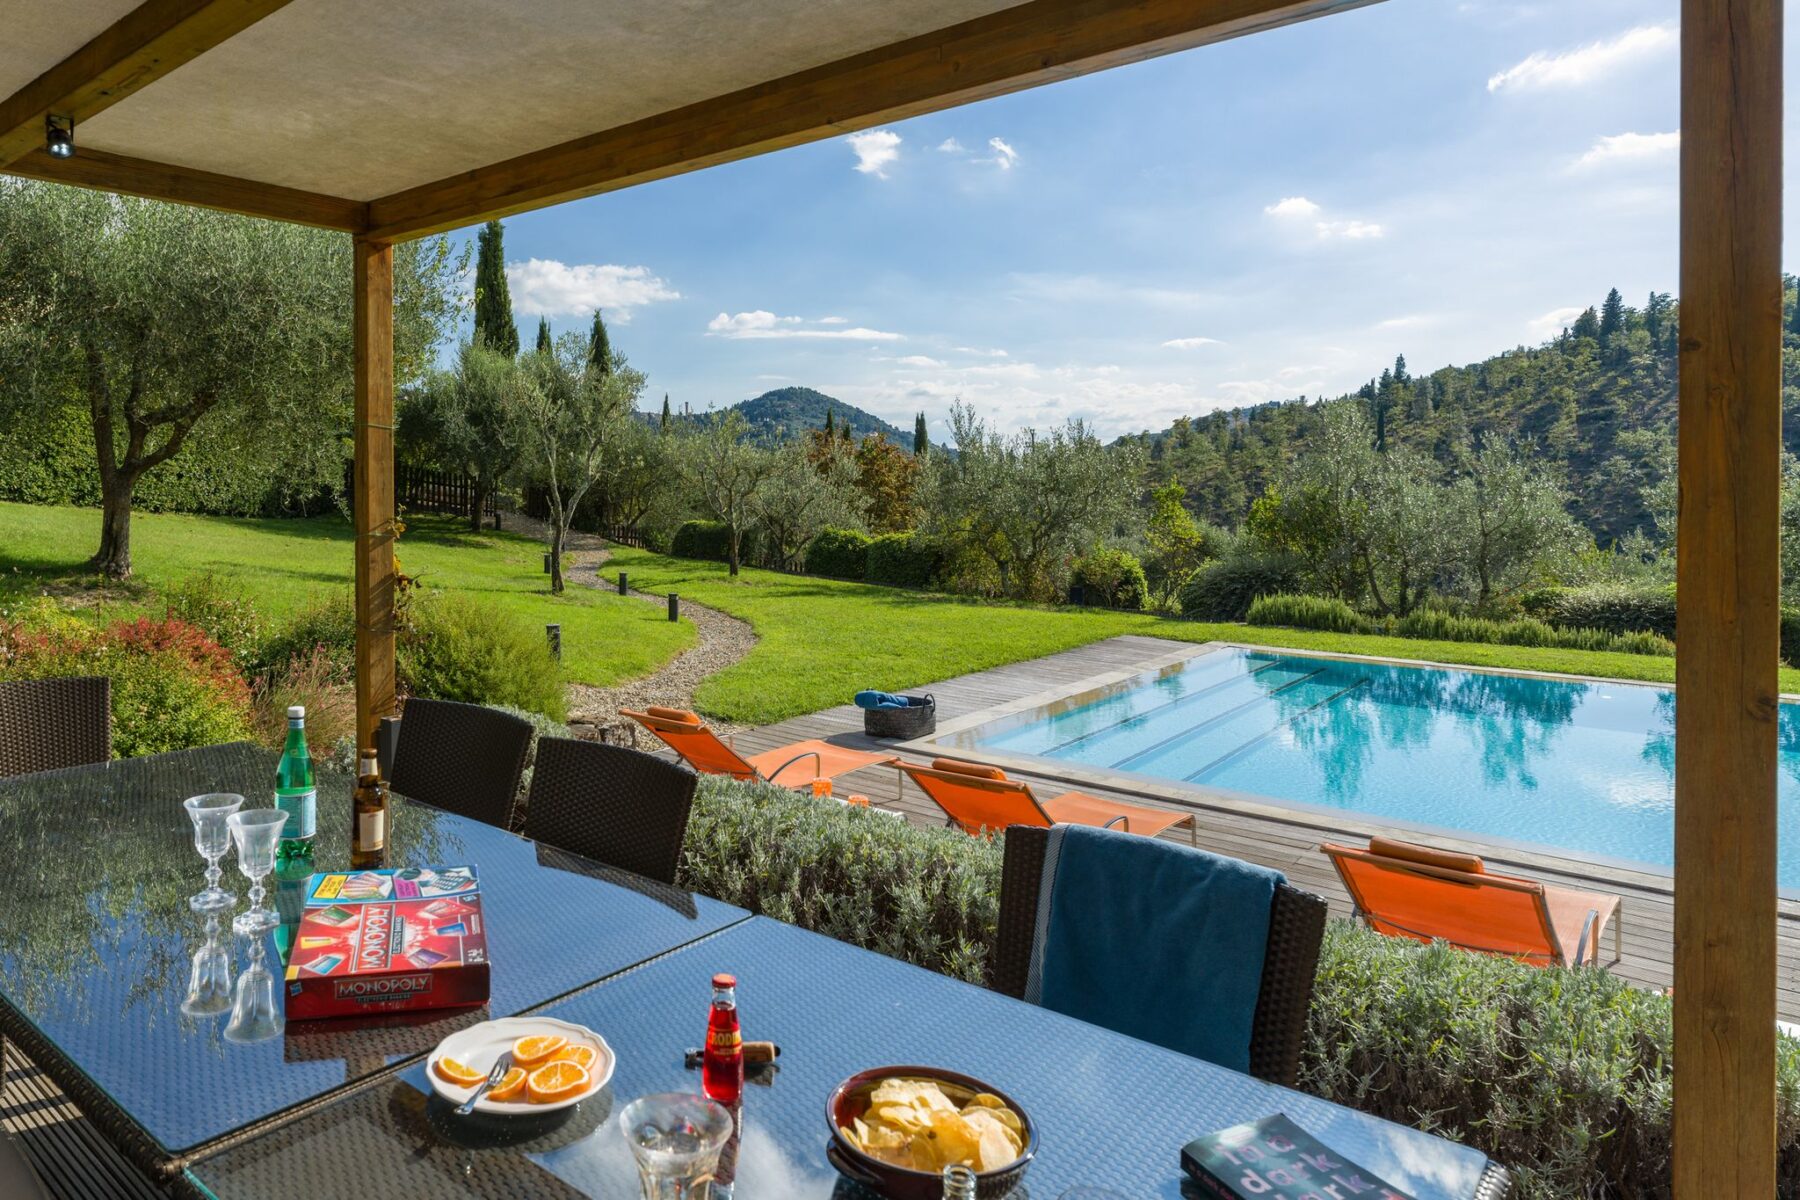 Tuscany Villa - 🎉Giuseppe is calling to say the new